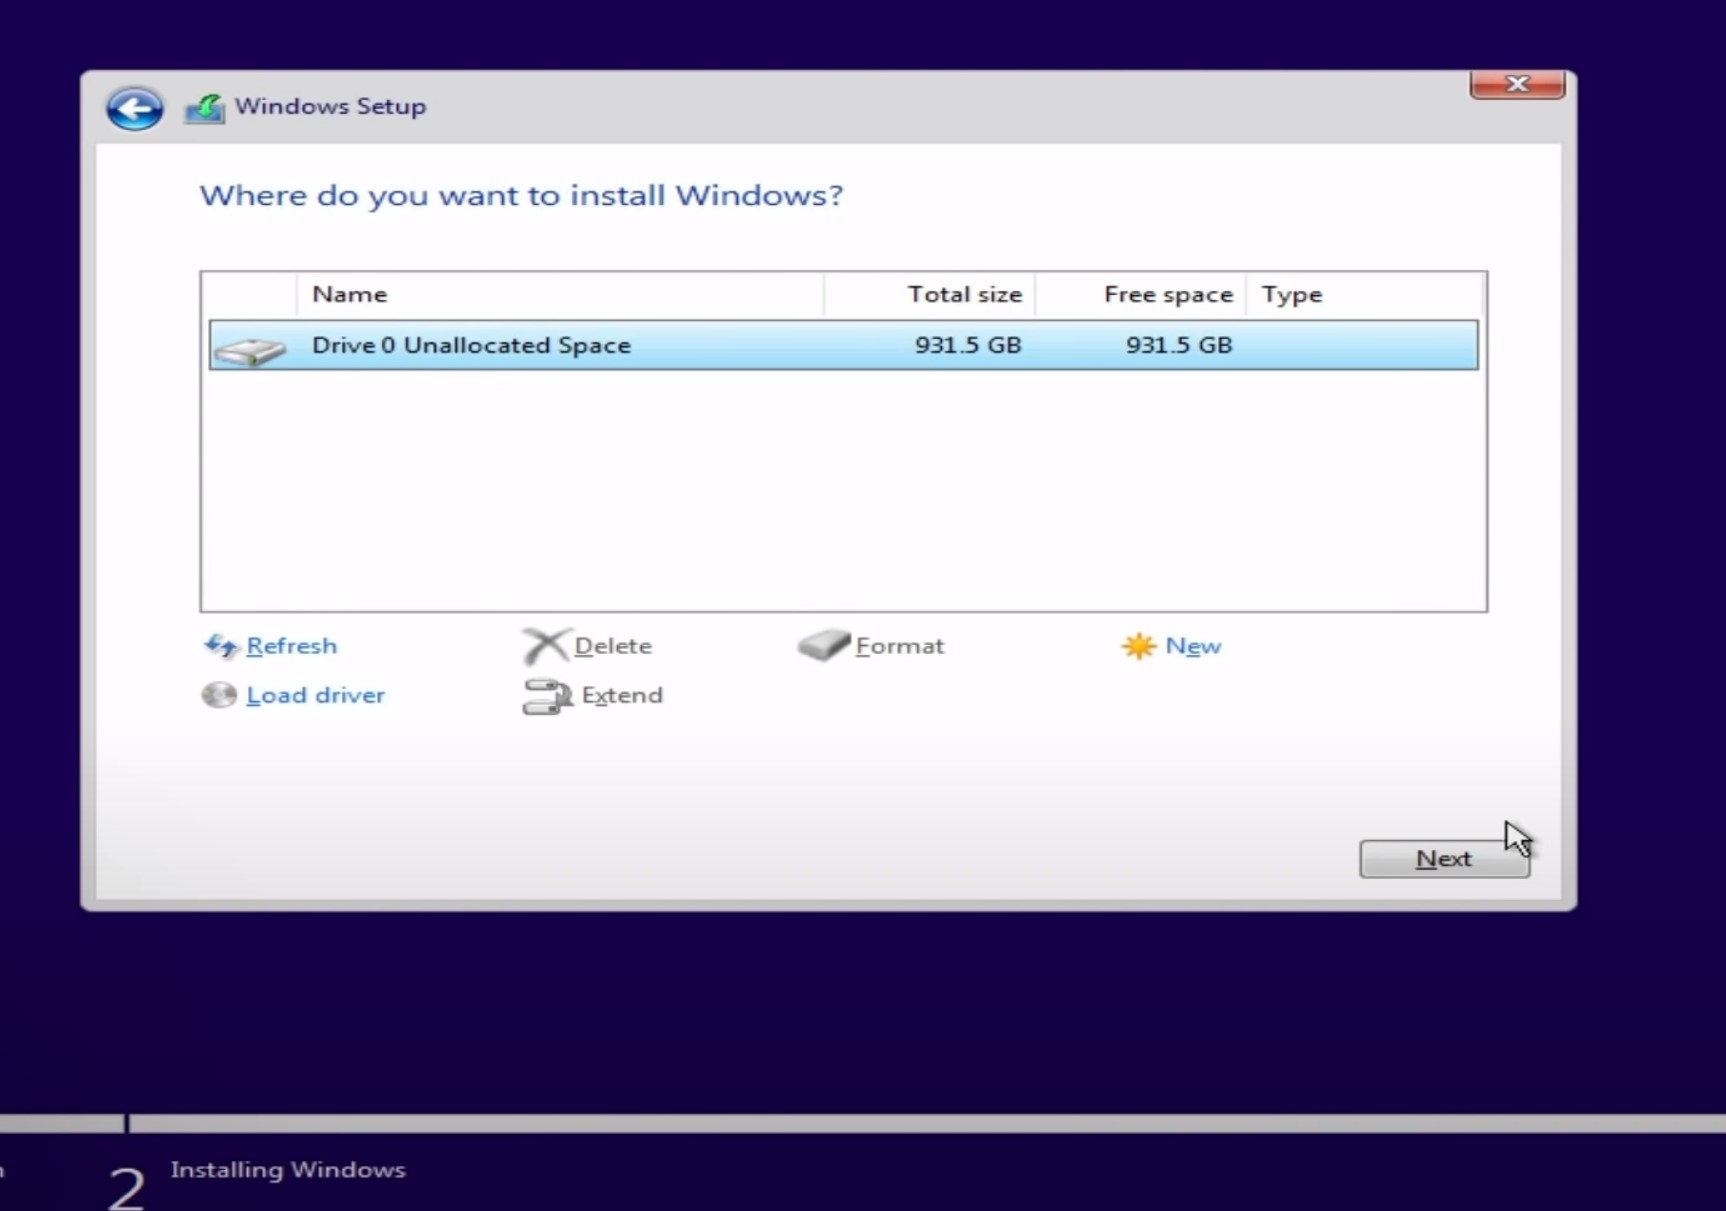 Installing Windows 11 and formatting a drive.